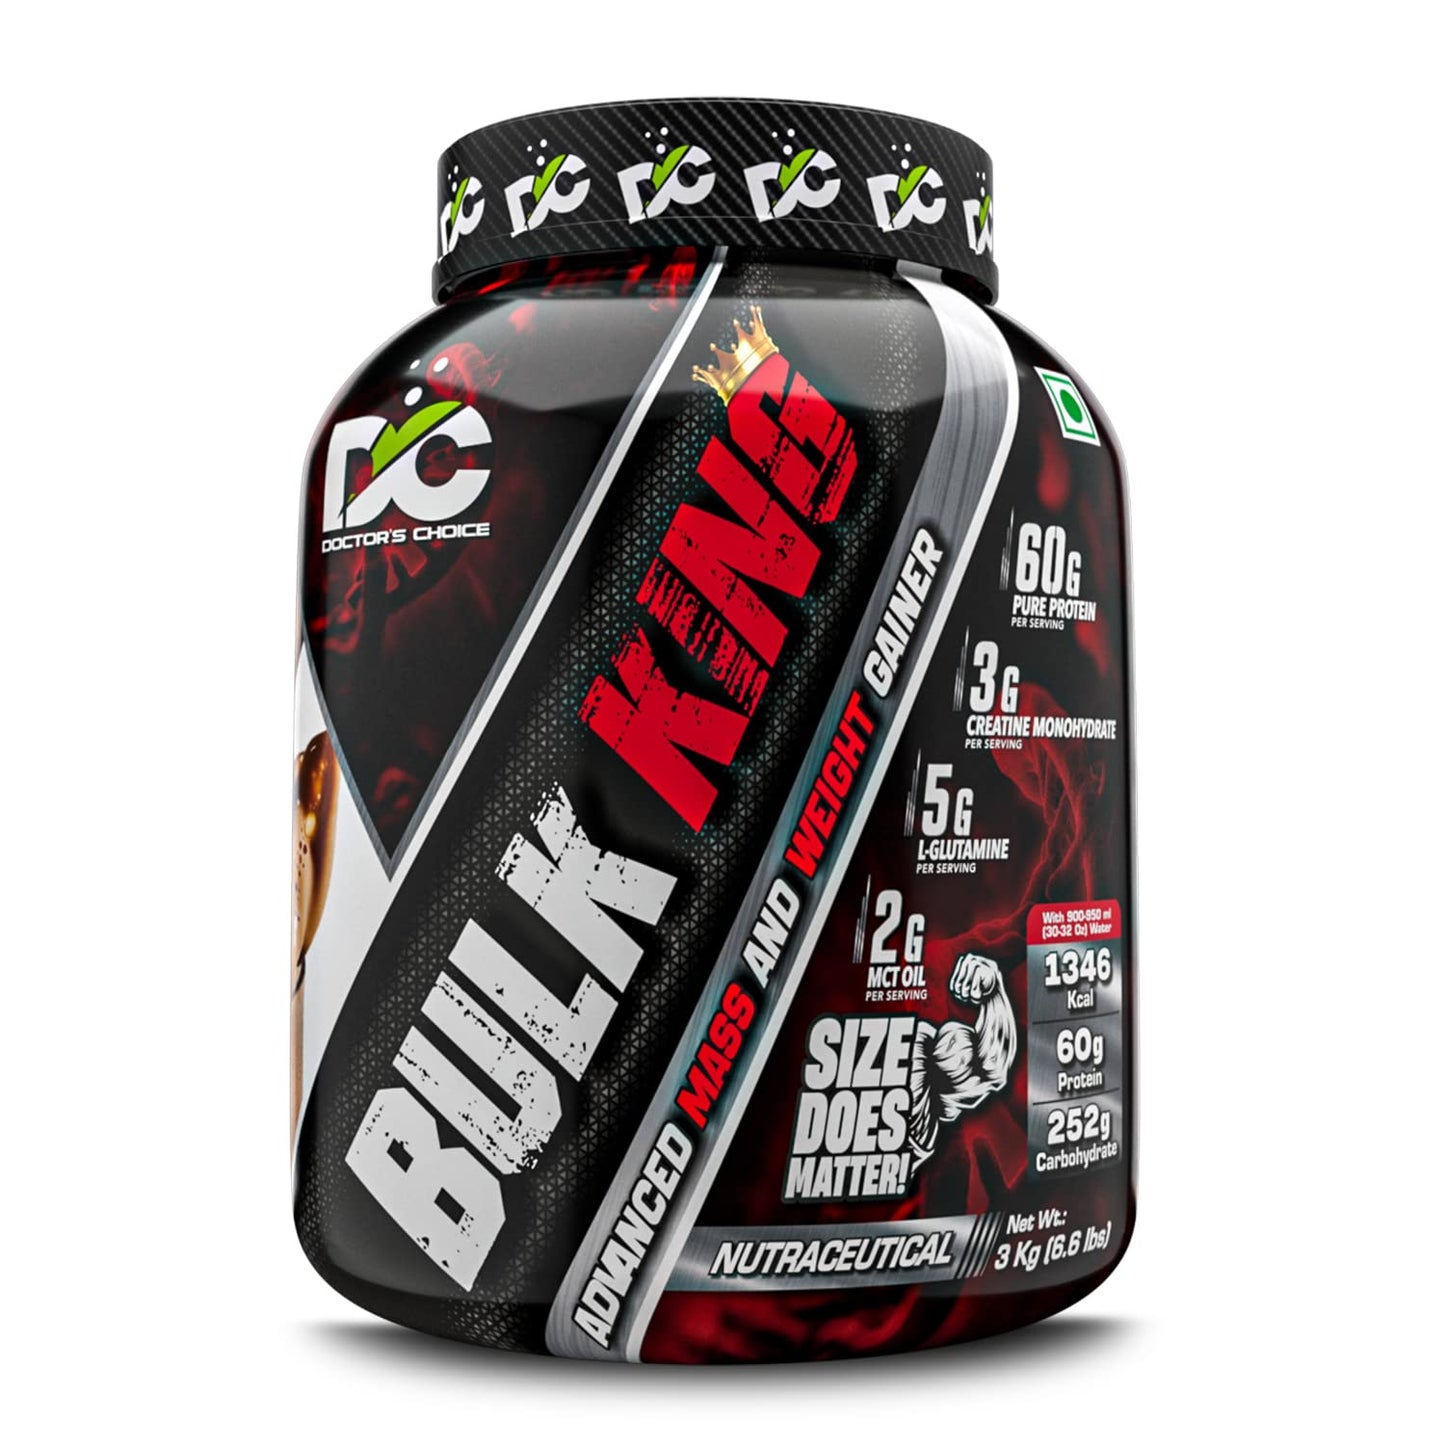 DC DOCTORS CHOICE Bulk King Advanced Mass and Weight Gainer for bulking (Choco Brownie Fudge, 3Kg Powder)